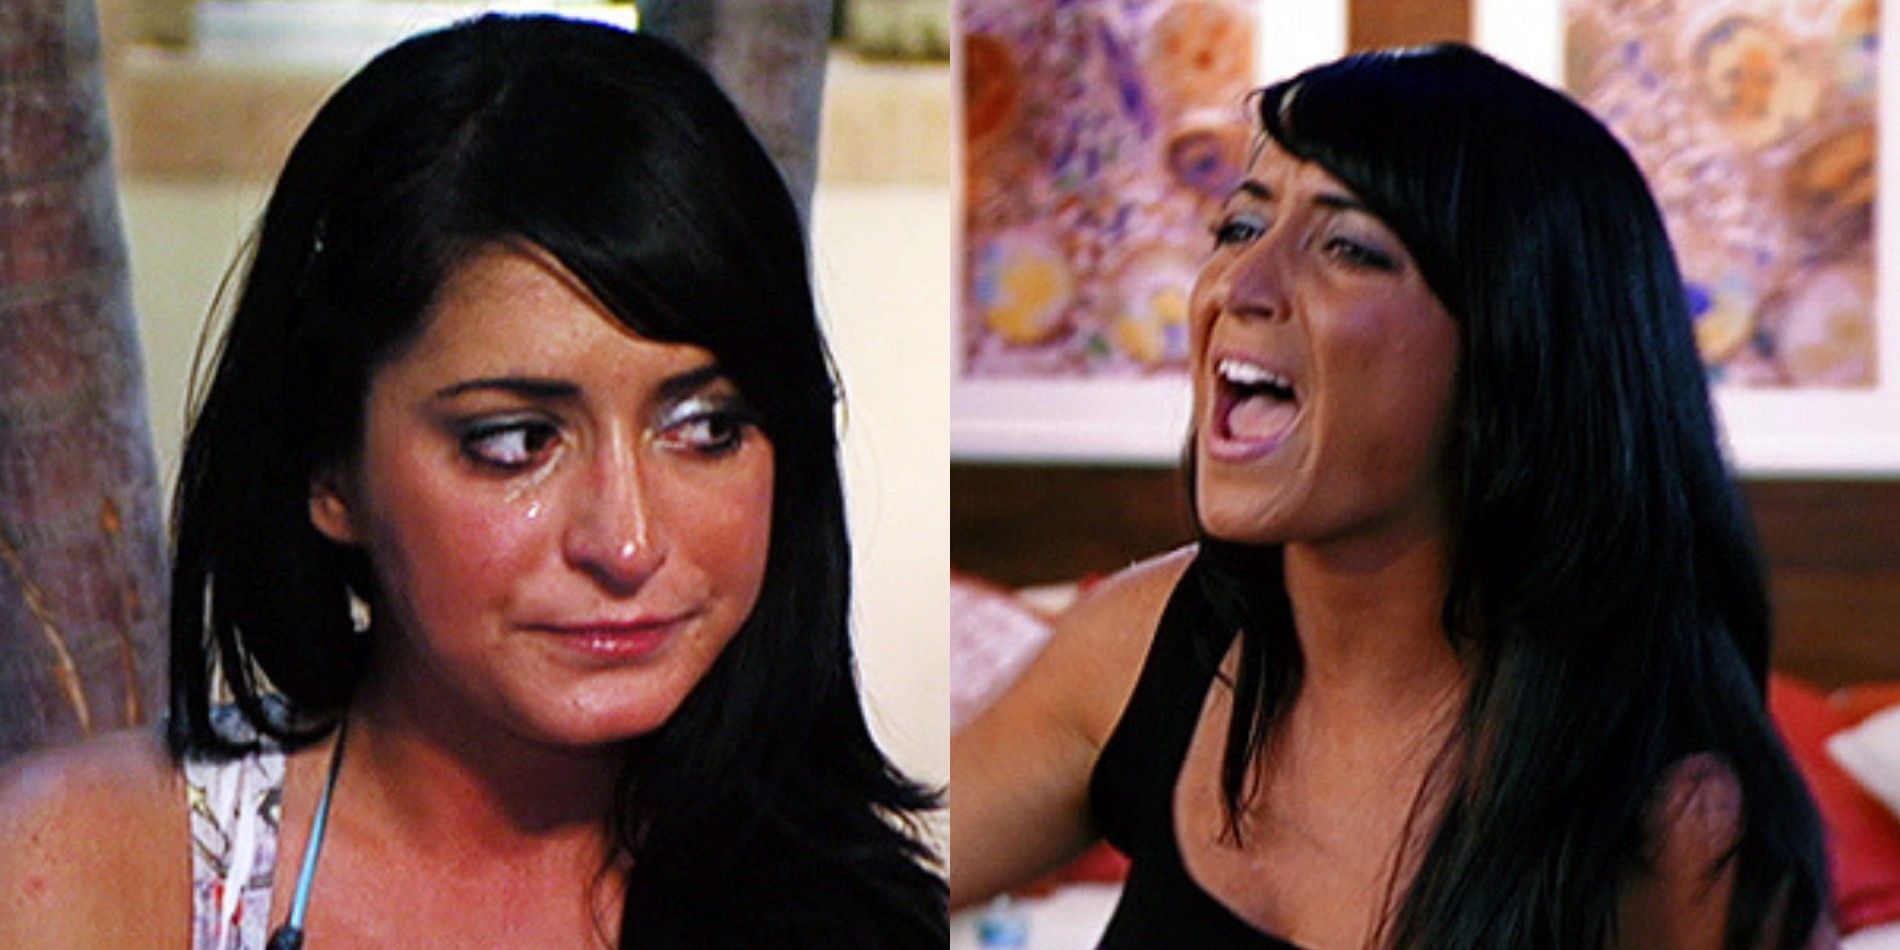 Angelina crying and screaming in Jersey Shore